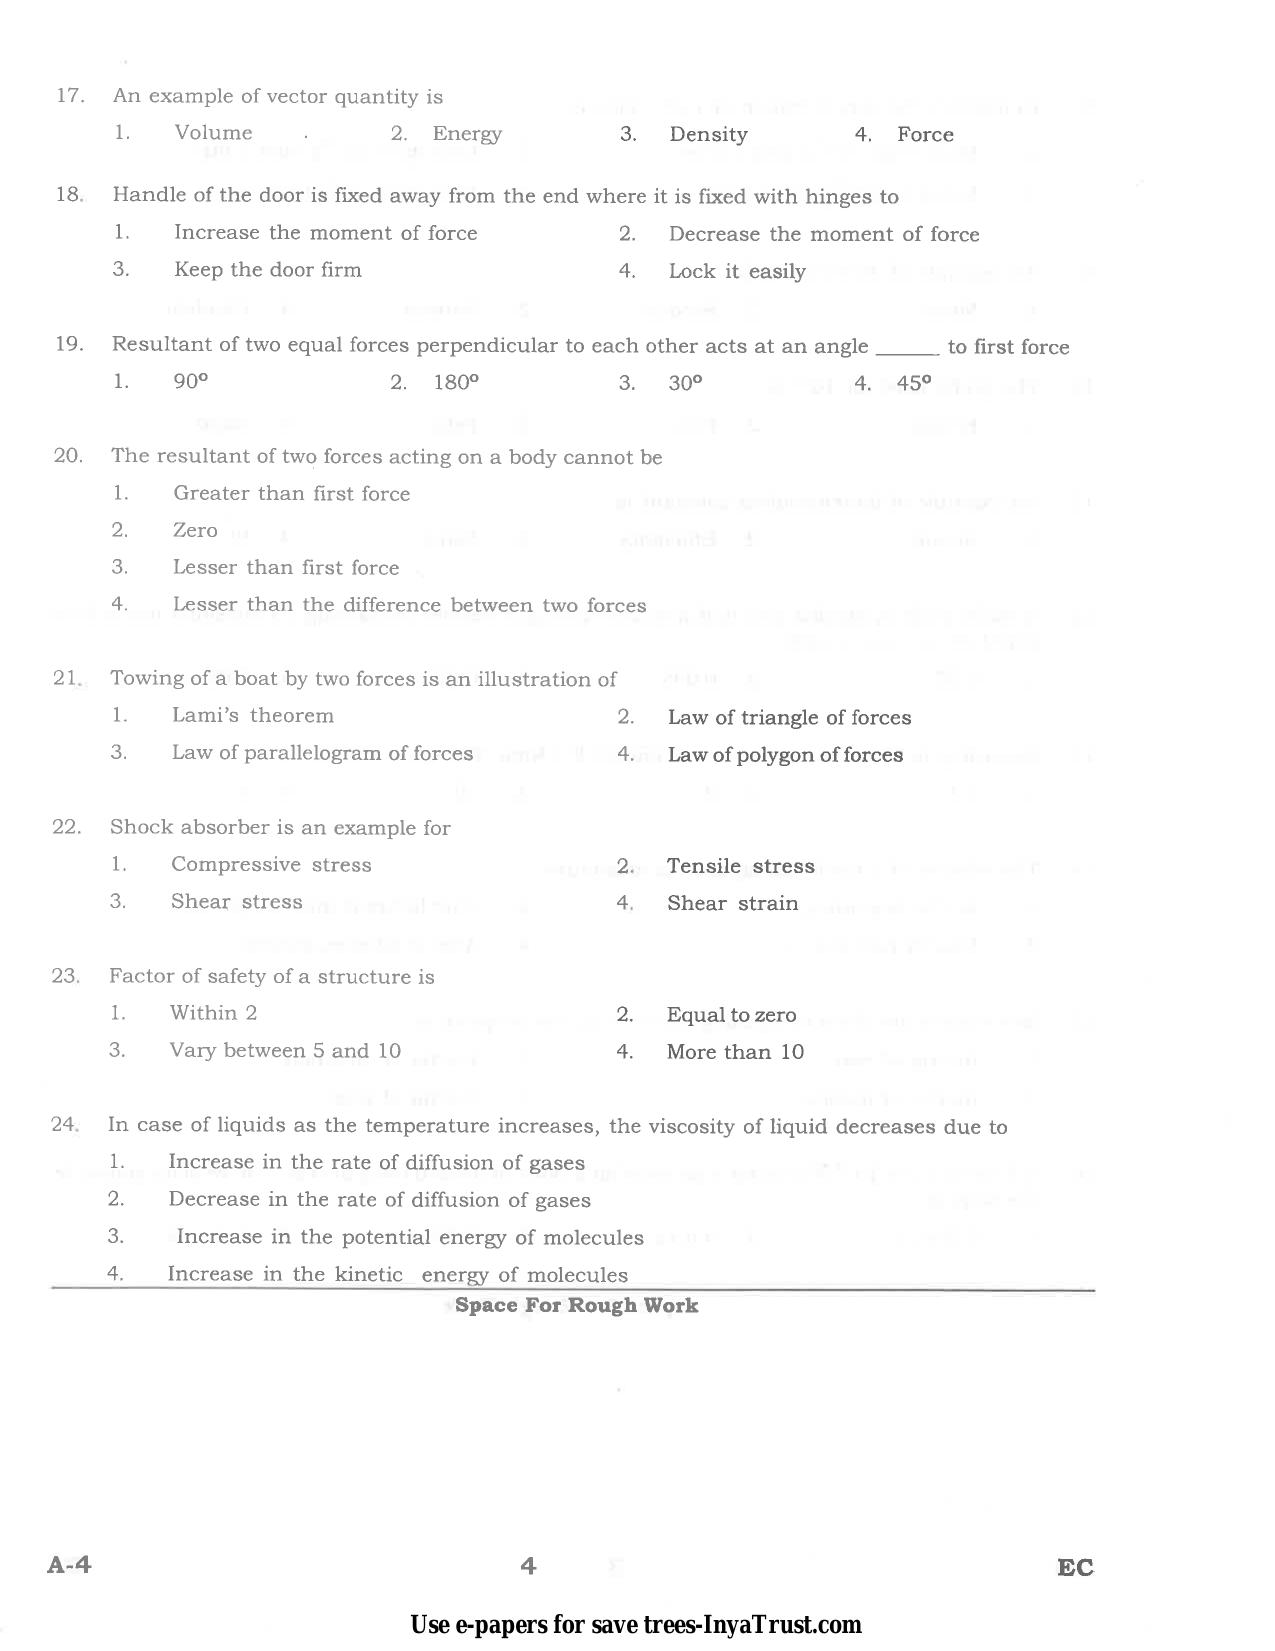 Karnataka Diploma CET- 2015 Electronics and Communication Engineering Question Paper - Page 4